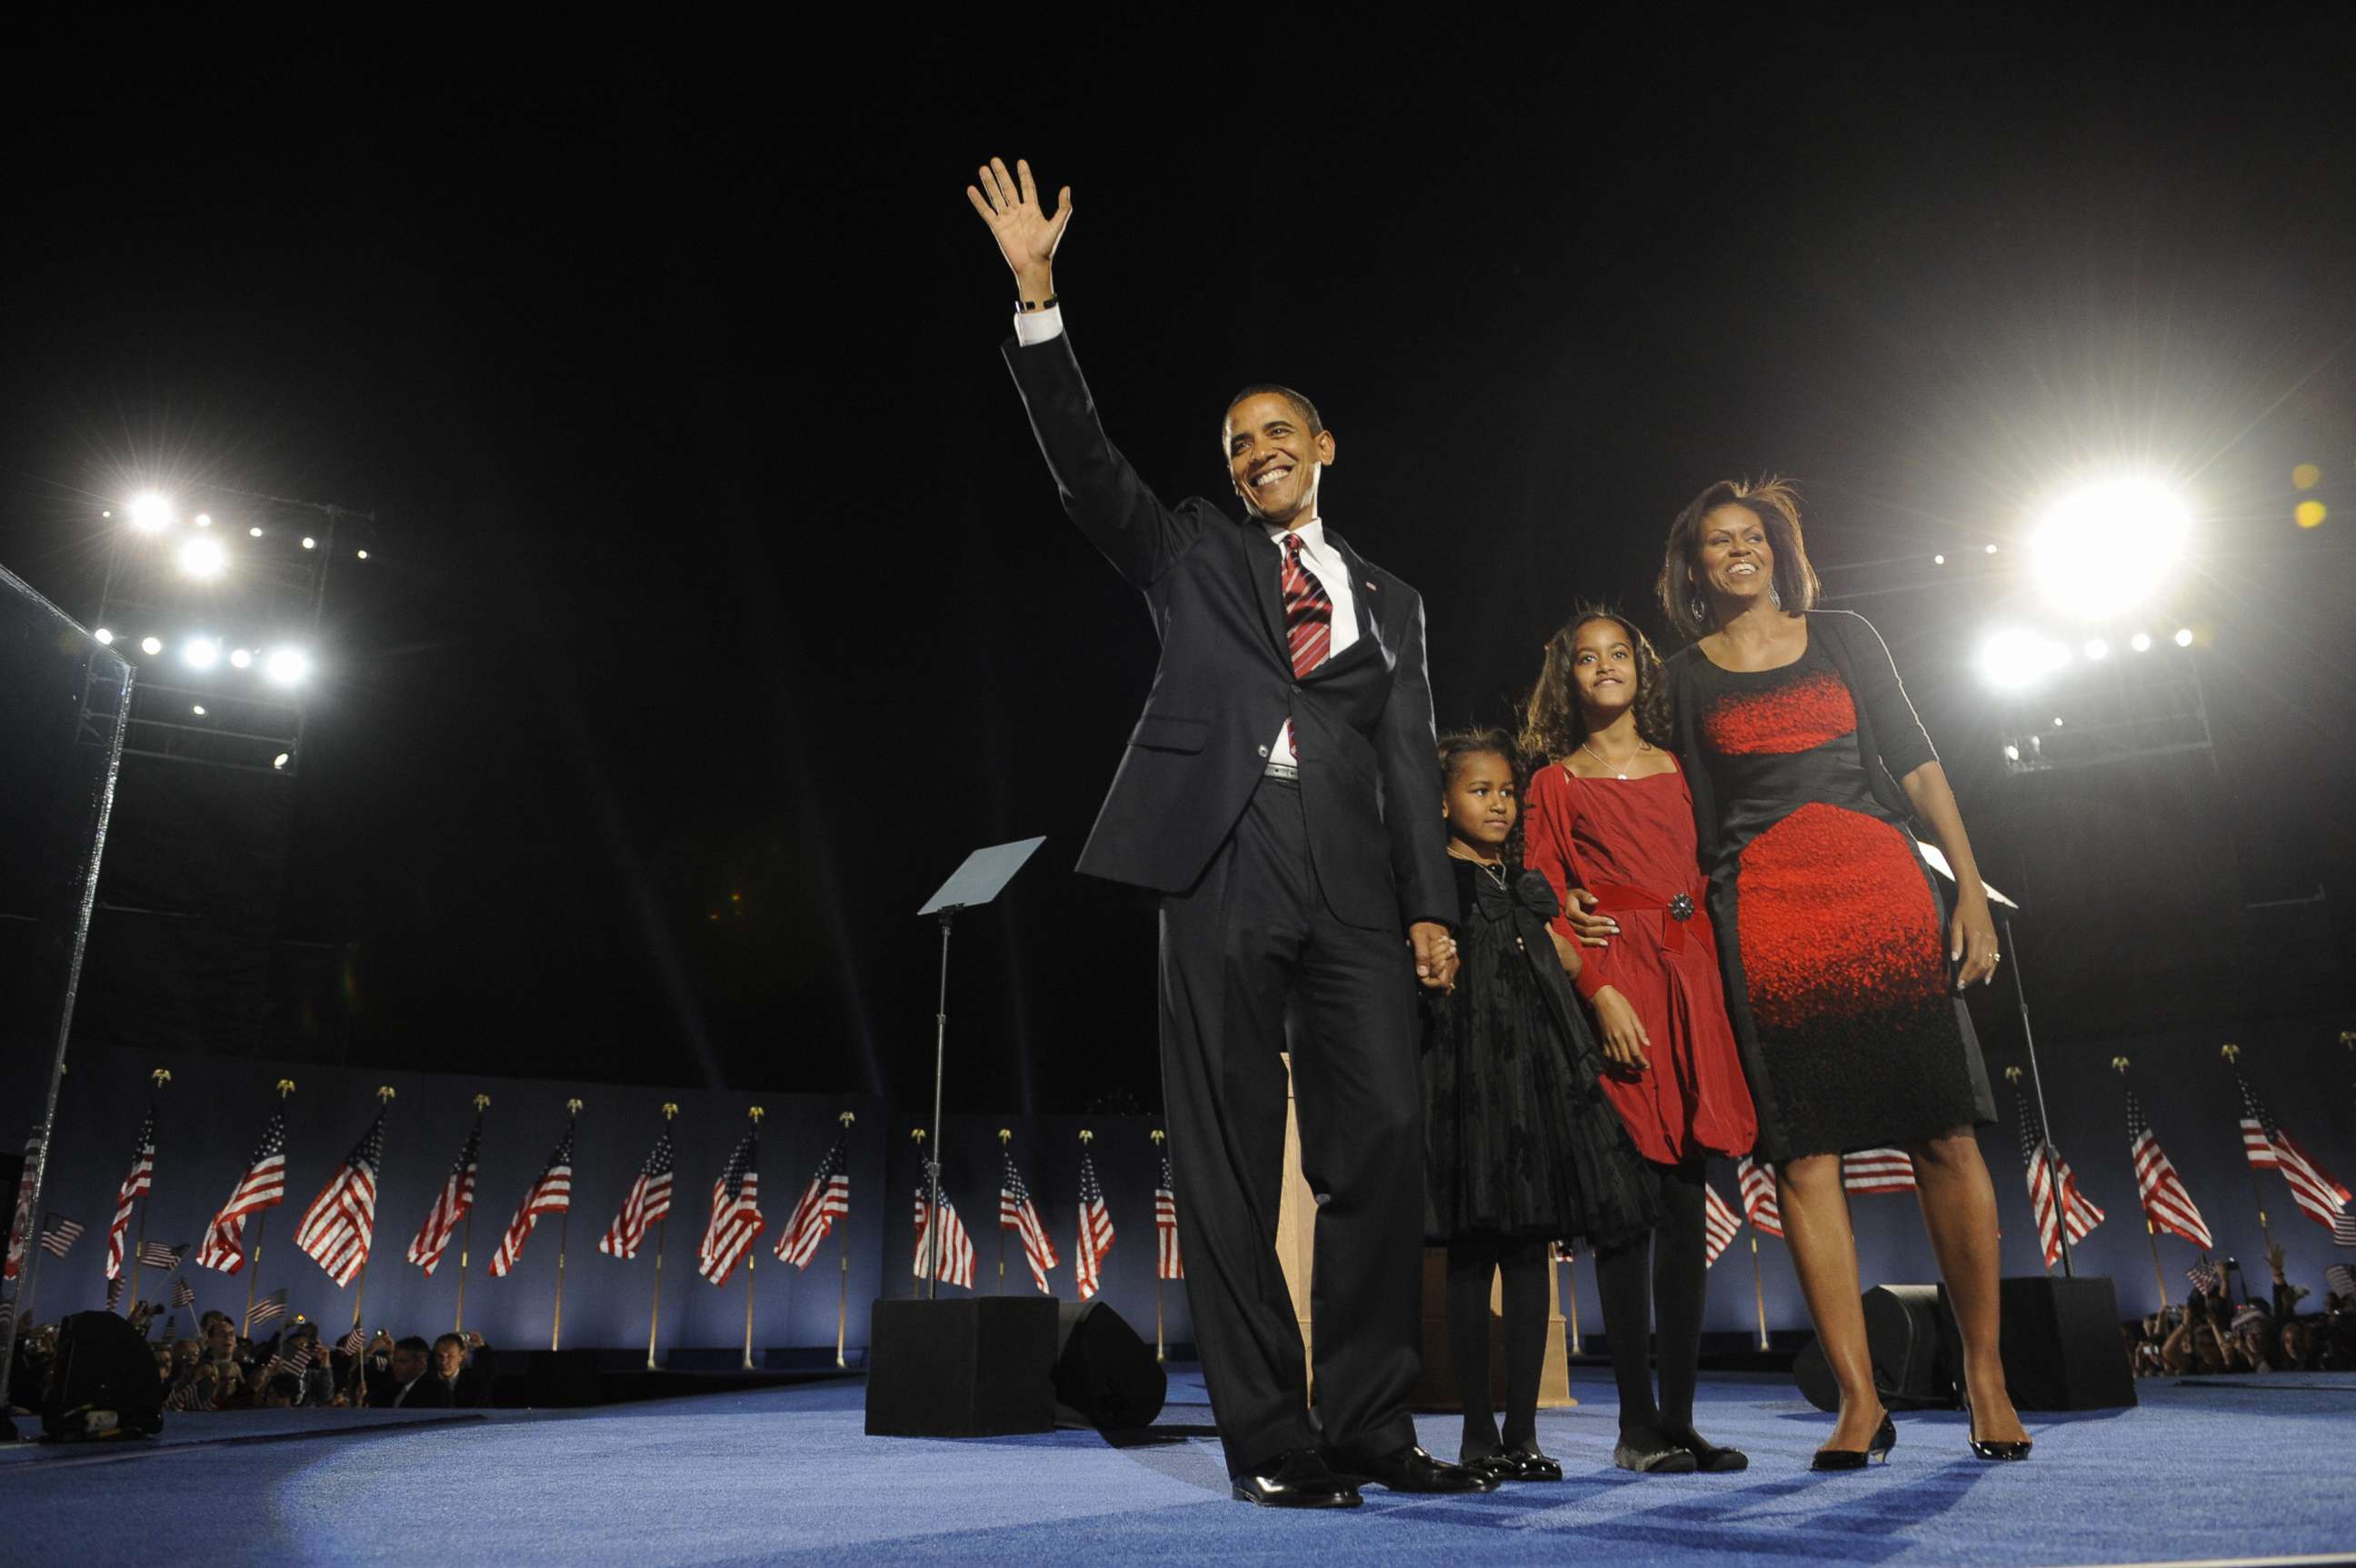 PHOTO: Democratic presidential candidate Barack Obama and his family arrive on stage for his election night victory rally at Grant Park, Nov. 4, 2008 in Chicago.